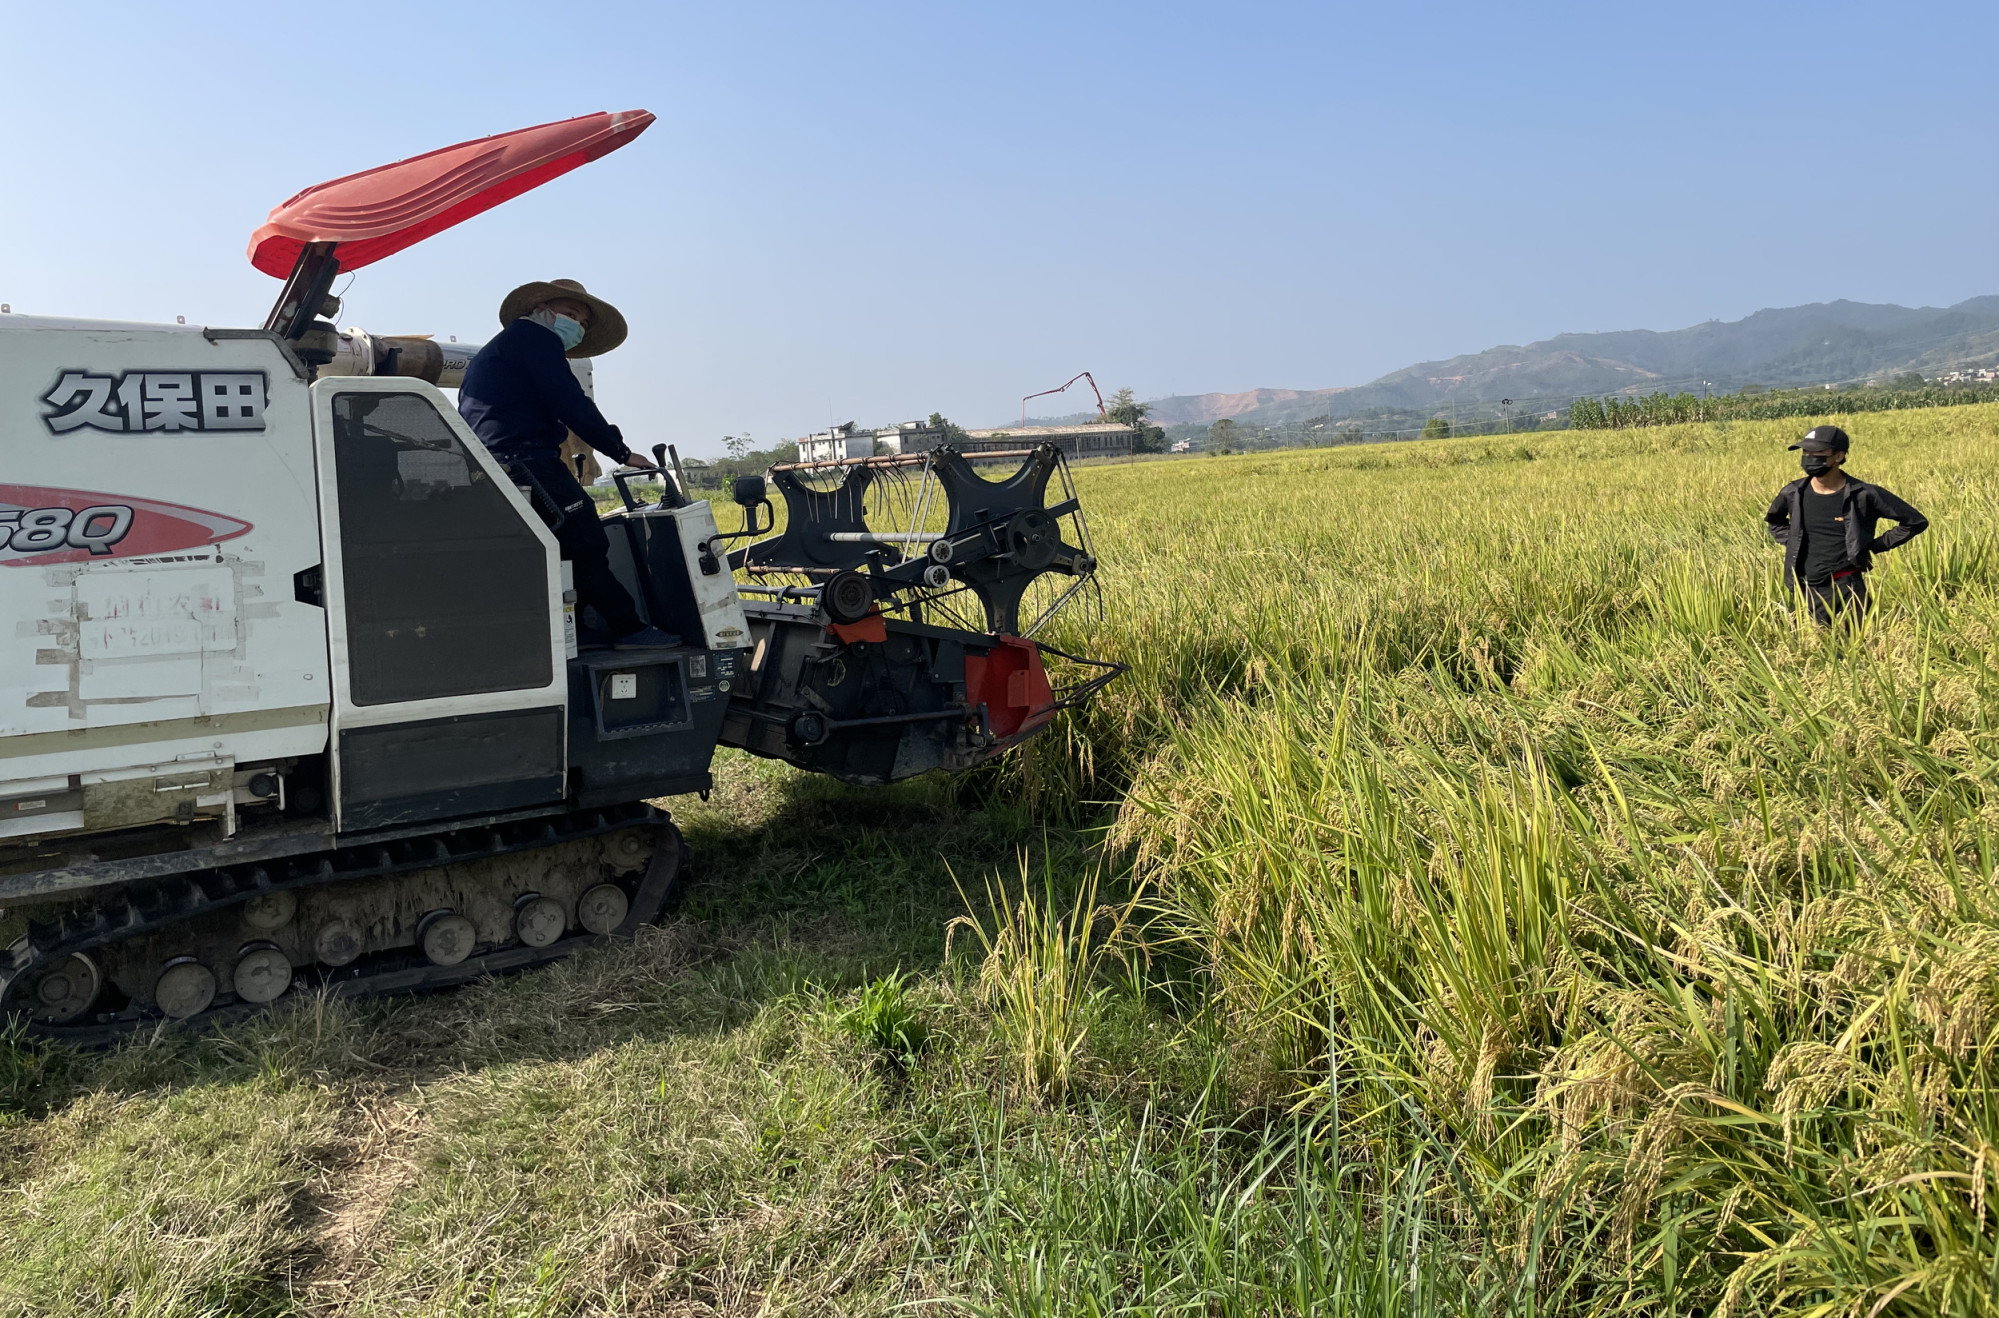 Harvesting under way for perennial rice after the first growing season in Guangxi. Photo: Liang Yuxin